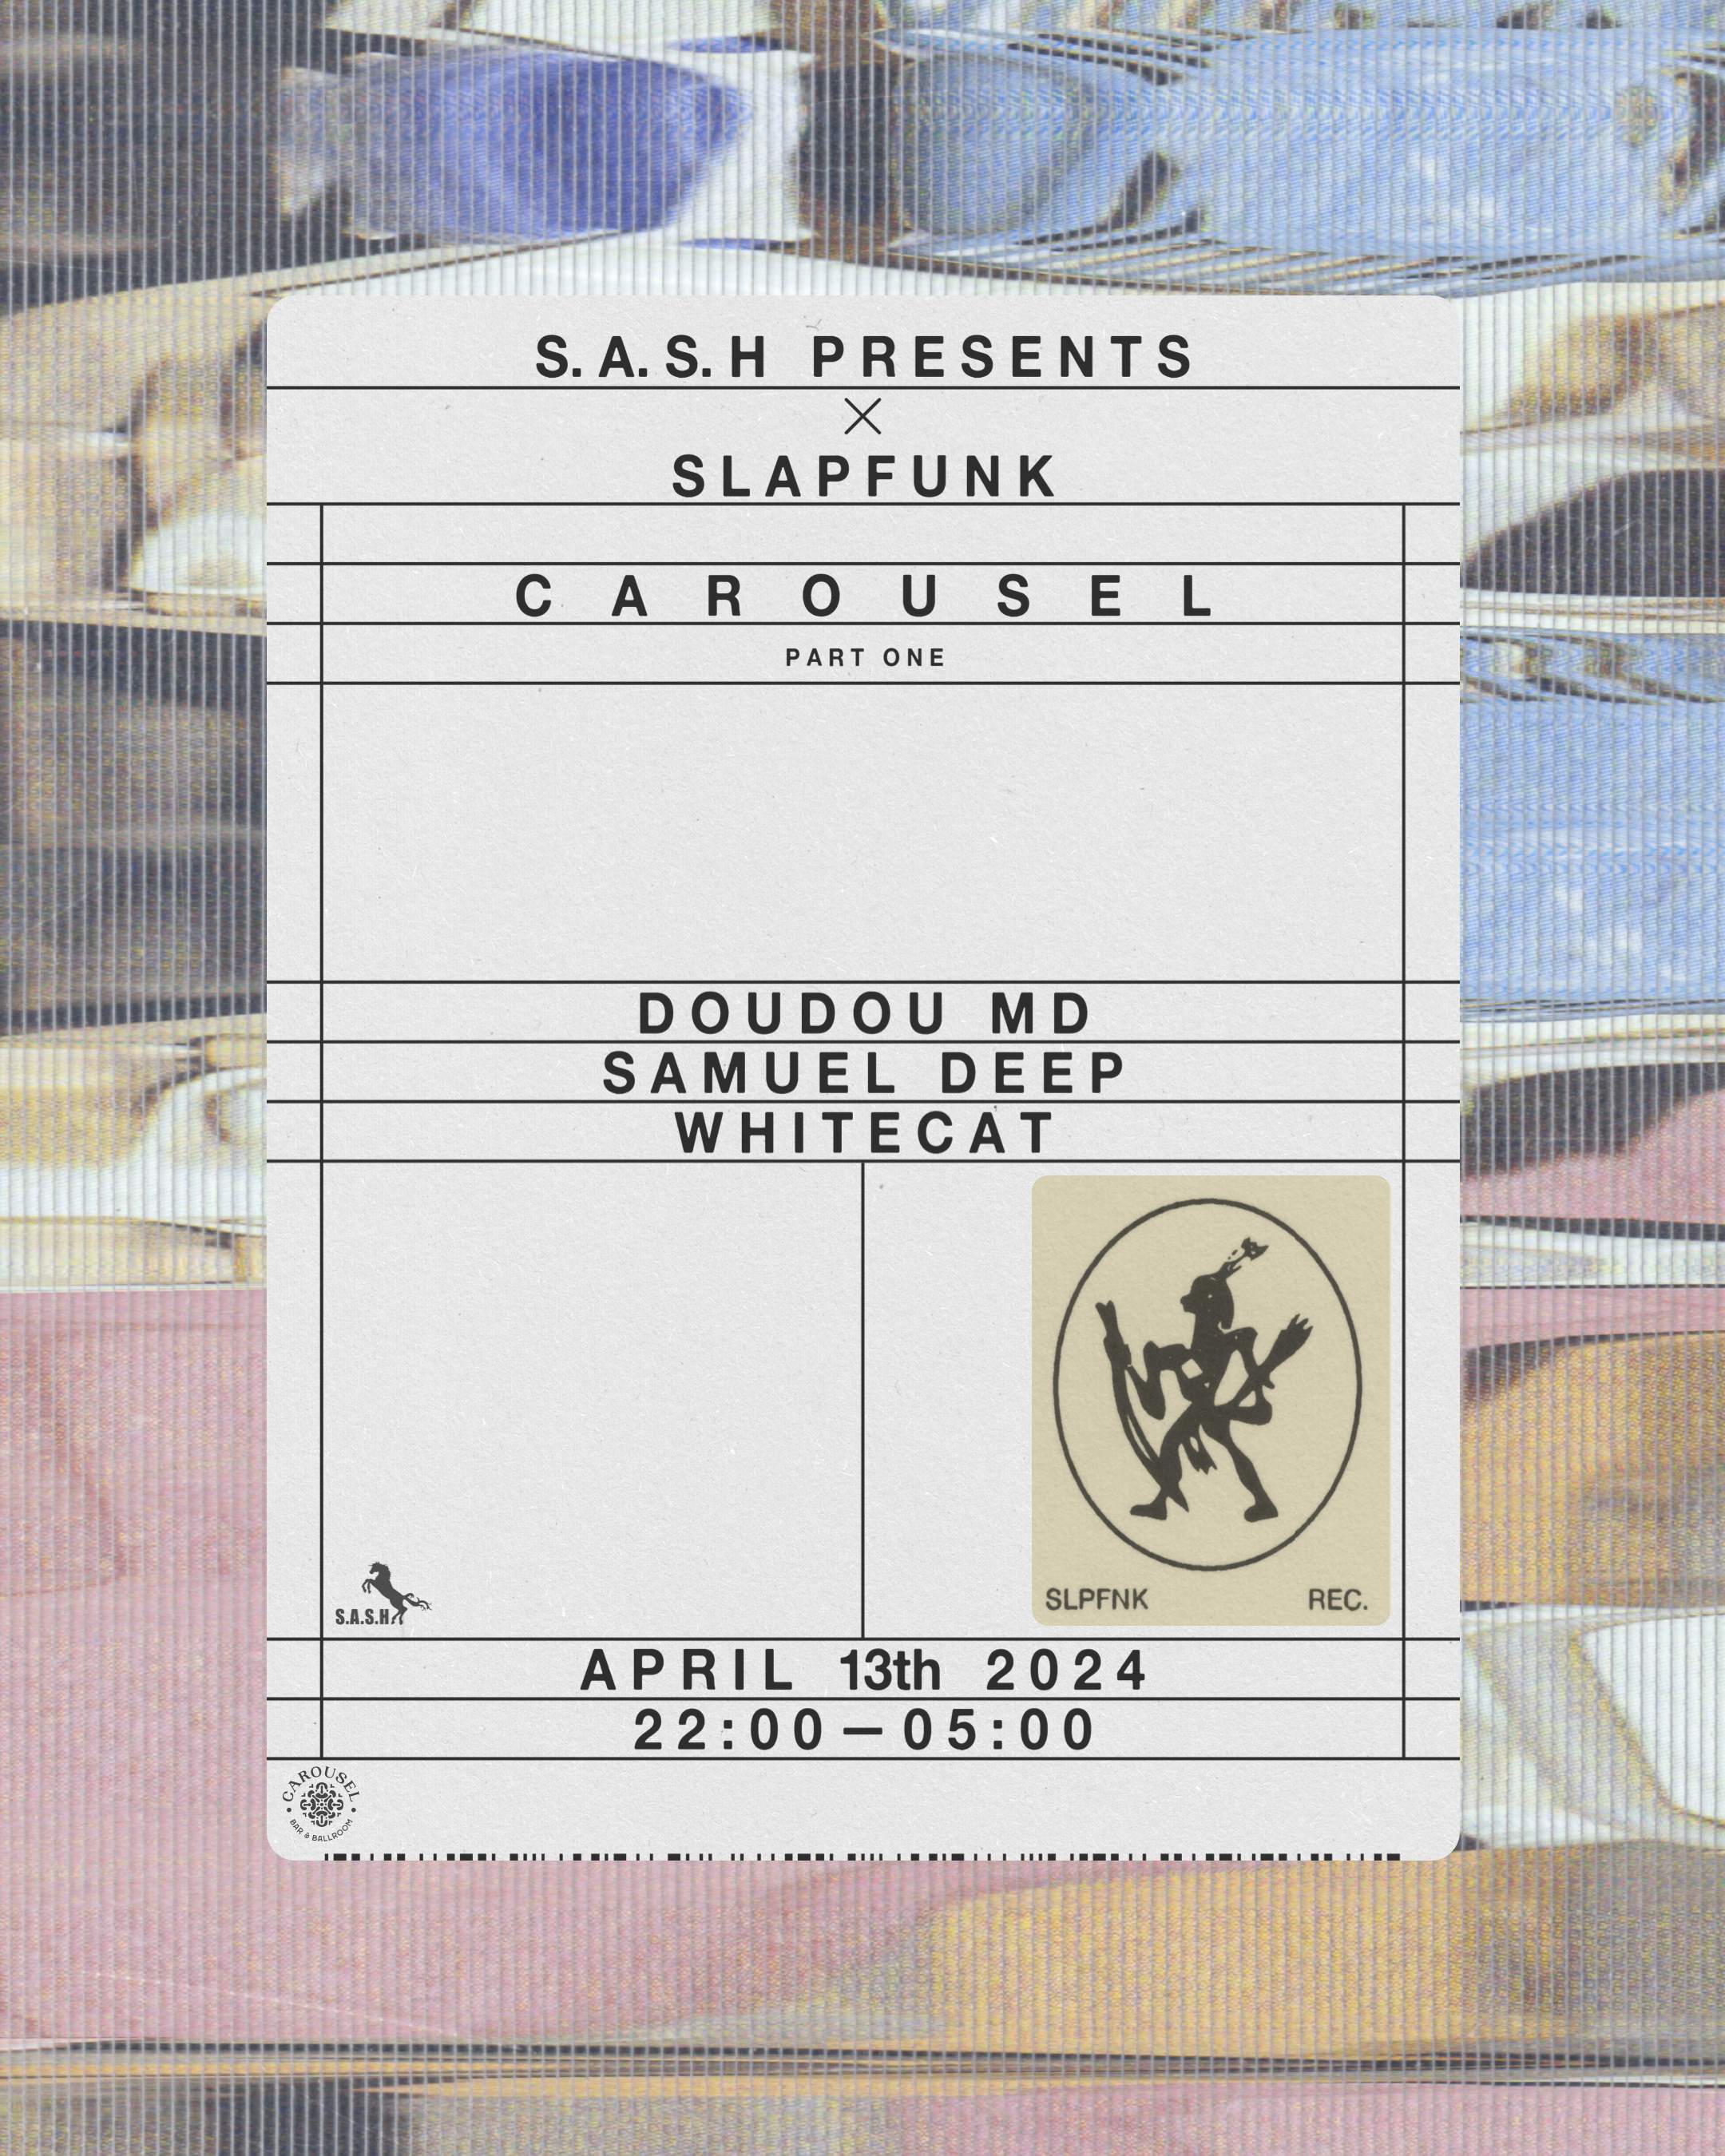 ★ S.A.S.H presents SlapFunk Part One ★ Doudou MD & Samuel Deep ★ Saturday April 13th ★ - フライヤー表